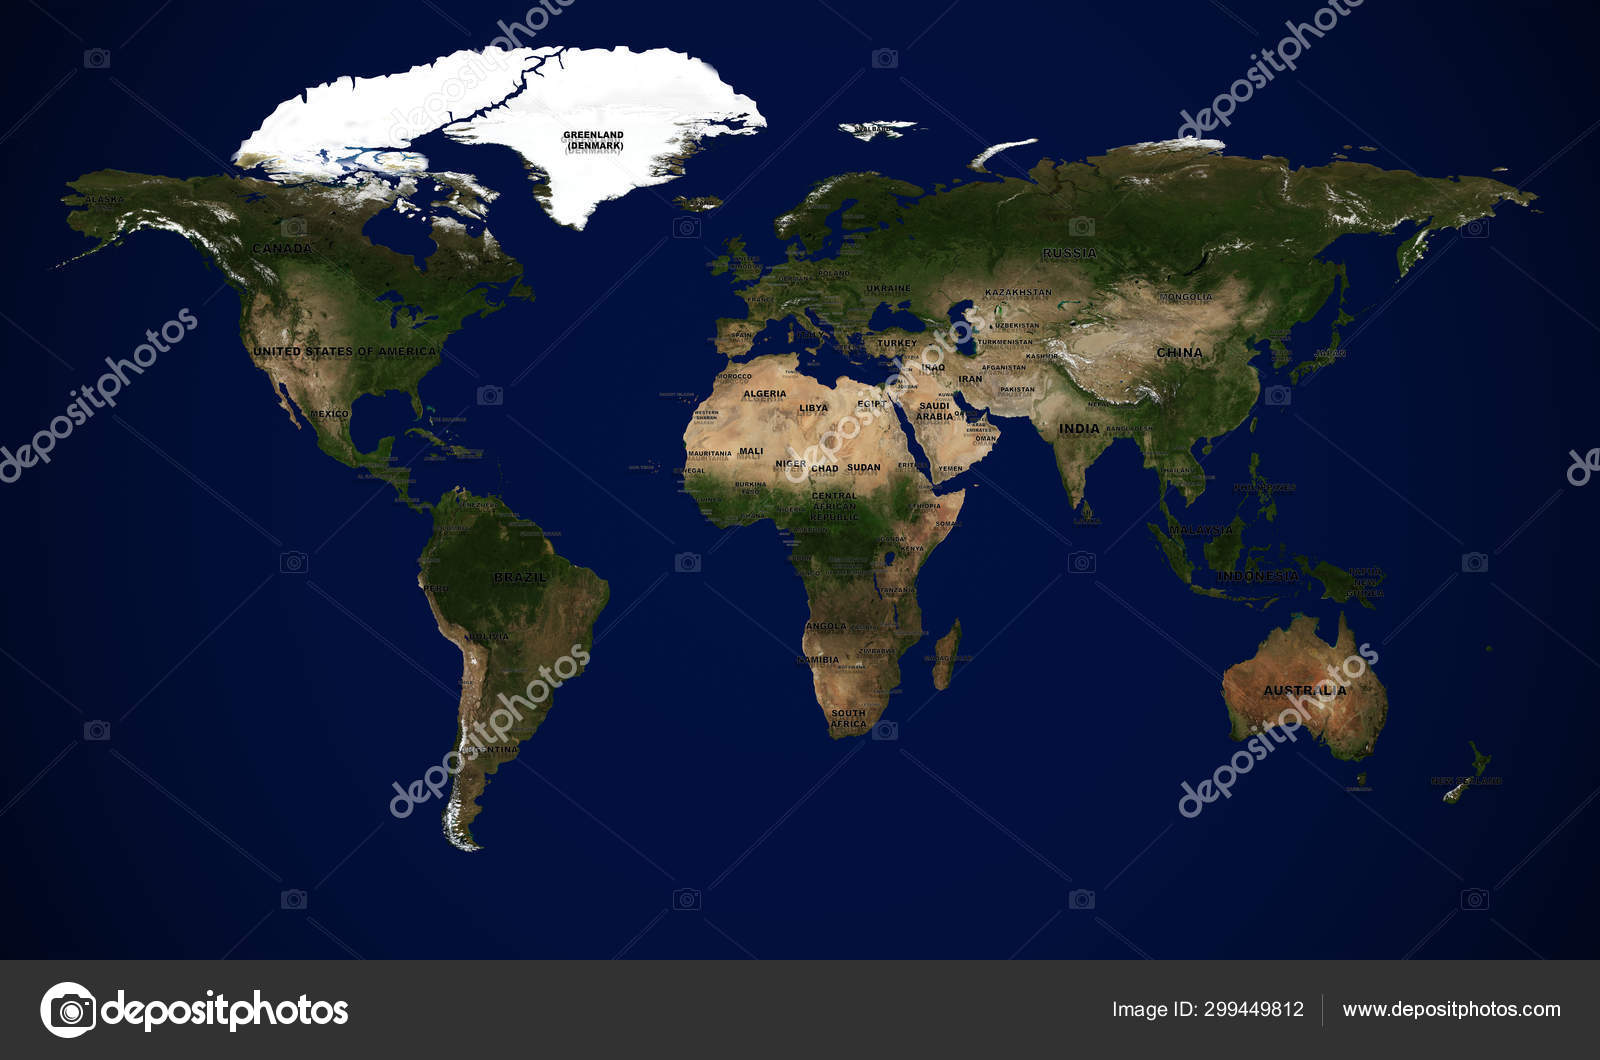 High Resolution World Map Country Names Stock Photo By C Deposit4434 Gmail Com